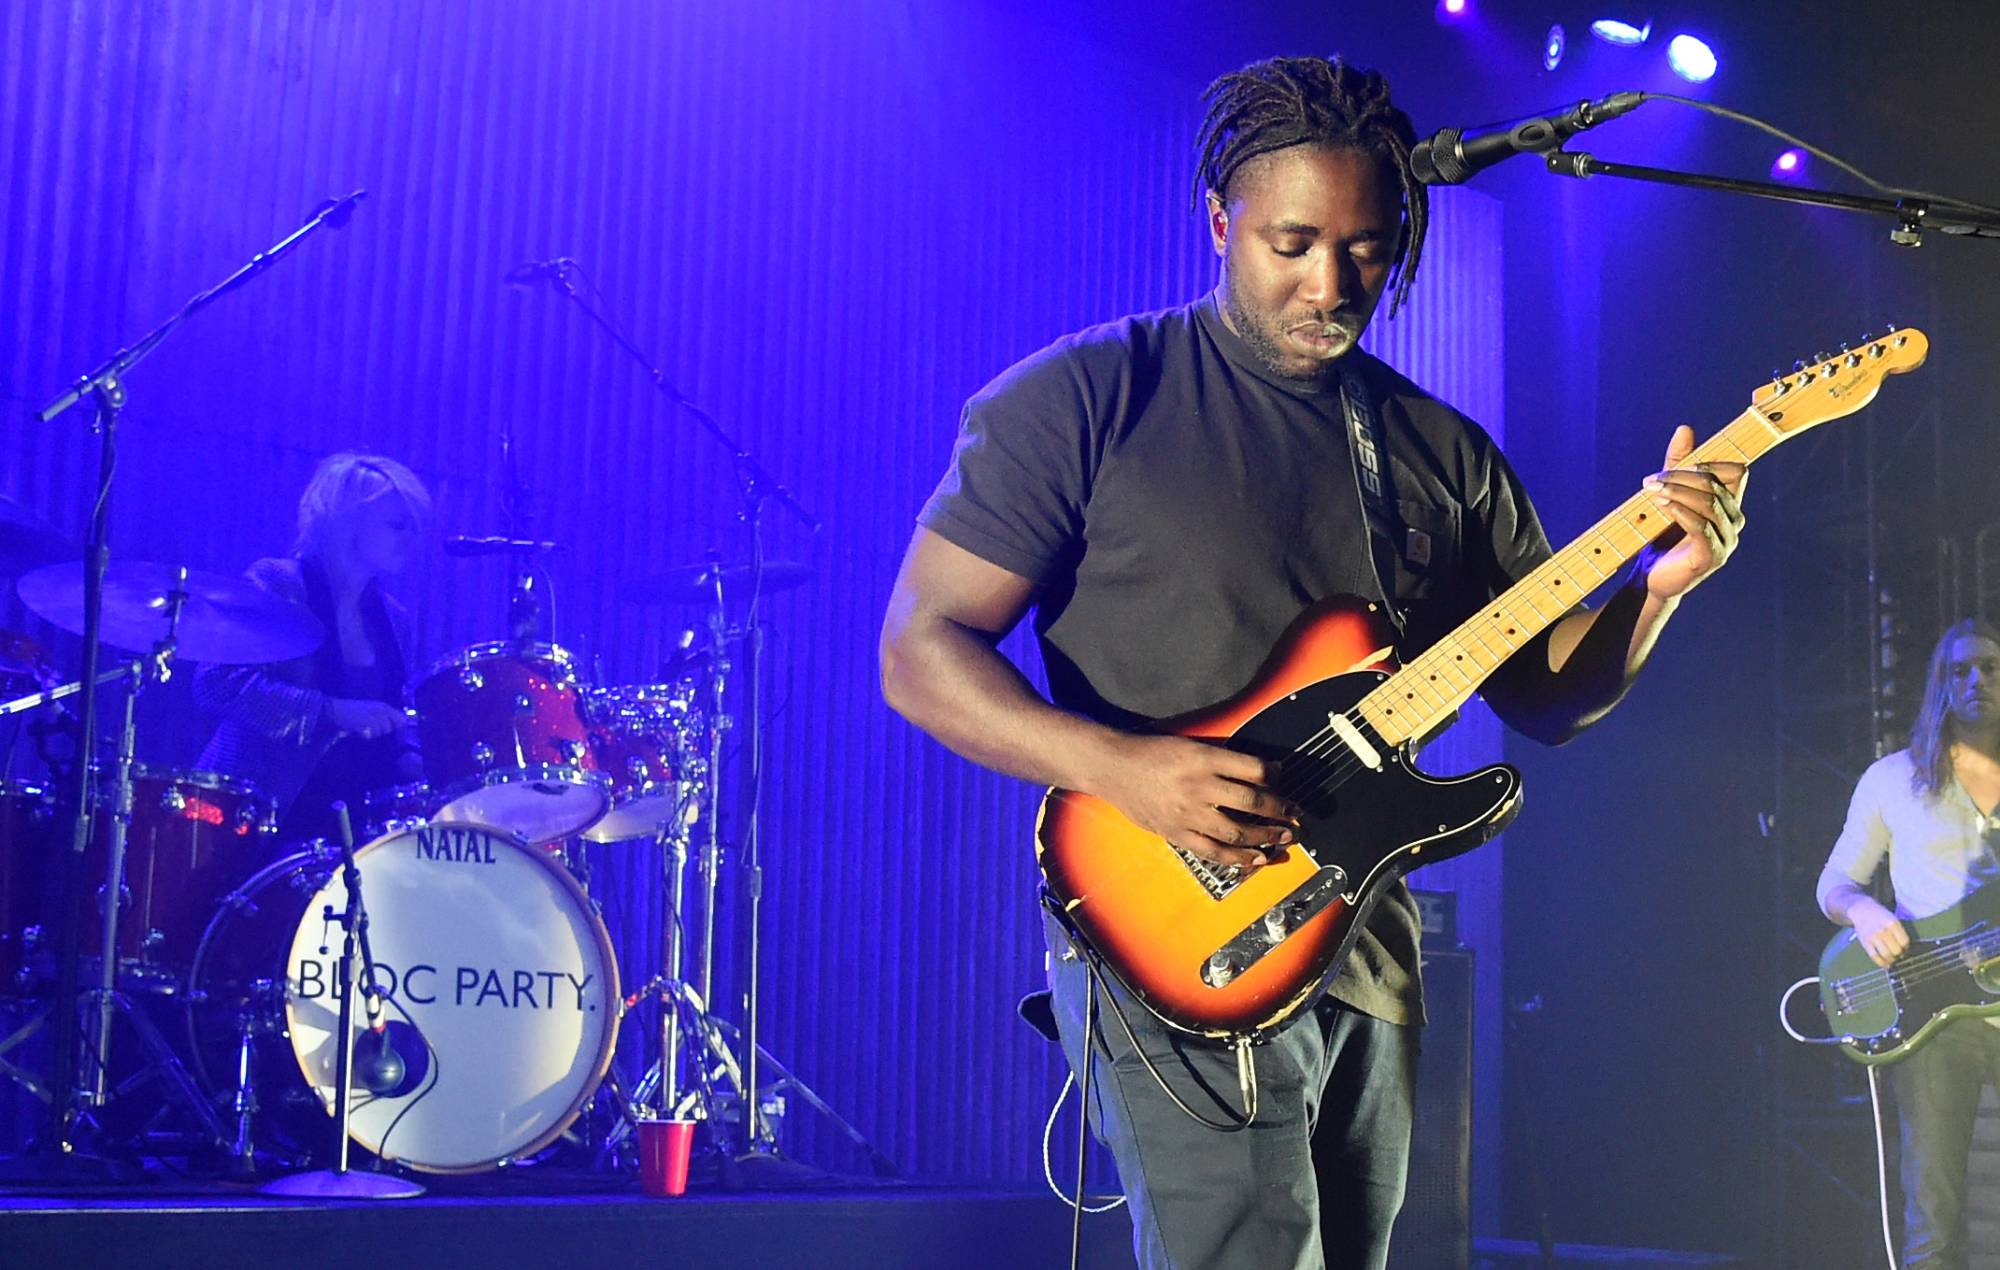 Kele Okereke of Bloc Party performs at the Fallout 4 video game launch event in downtown Los Angeles on November 5, 2015. Credit: Jason Merritt